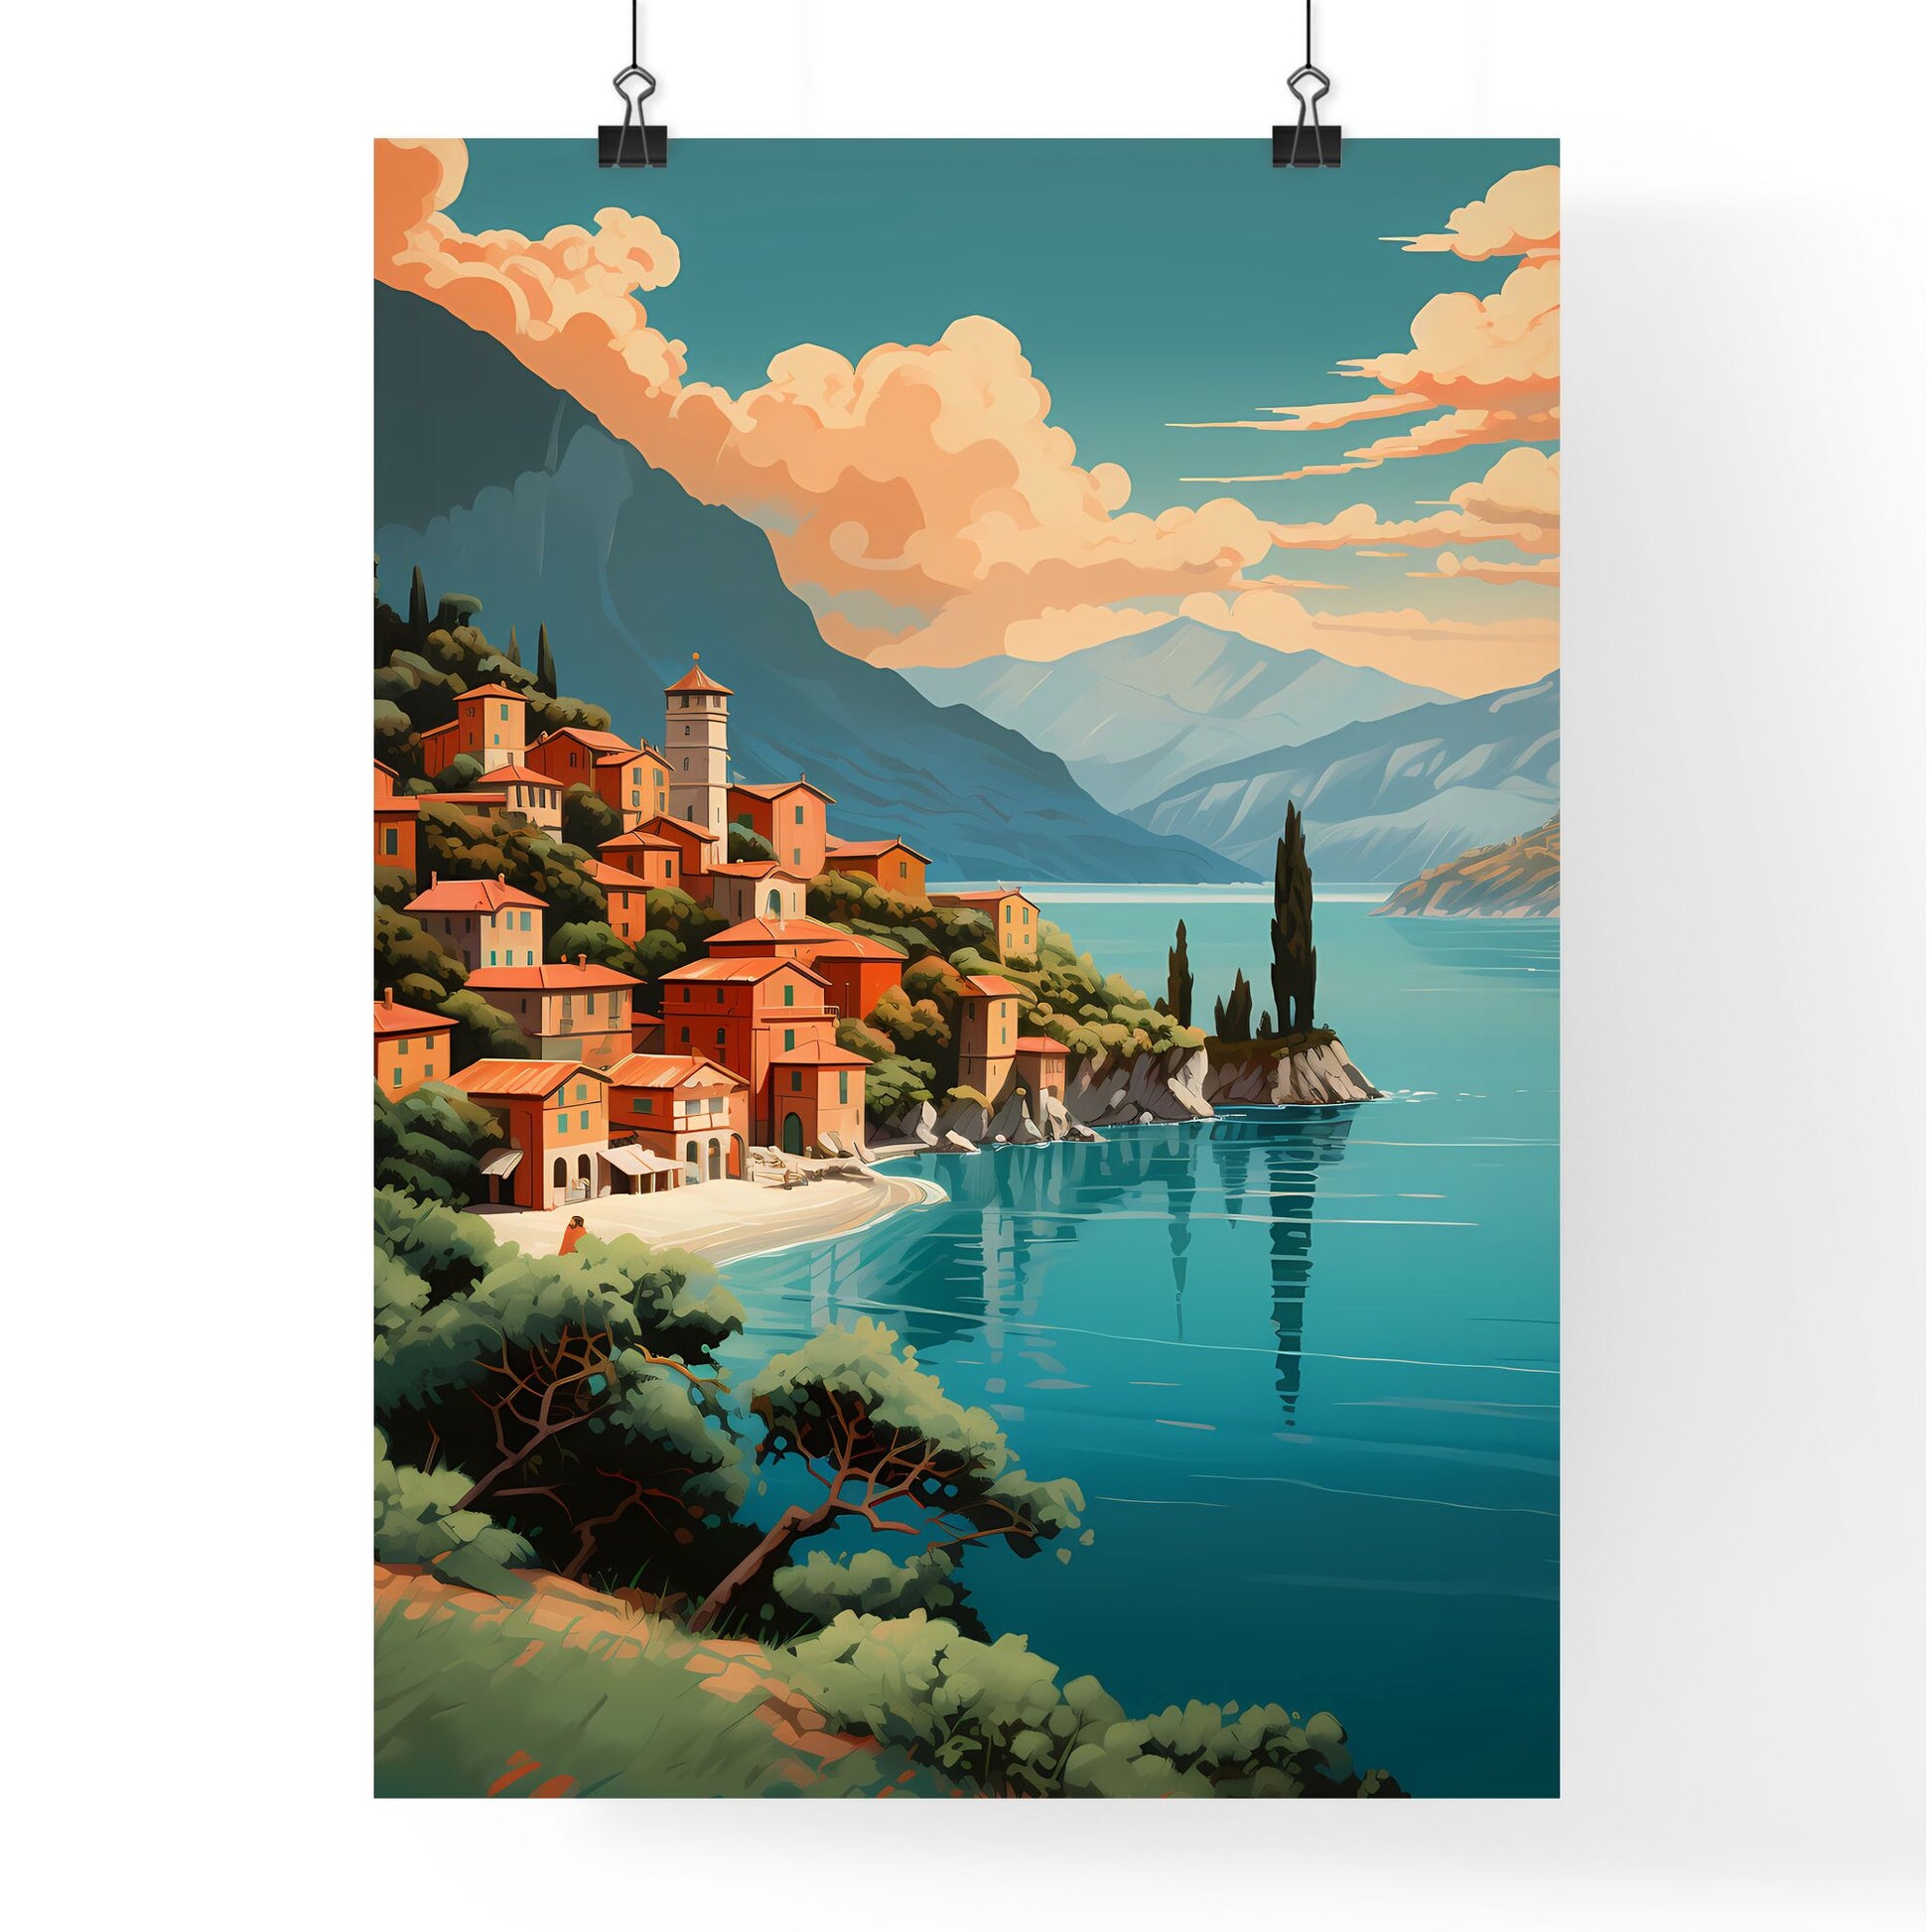 Painting Of A Town On A Hill By A Body Of Water Art Print Default Title